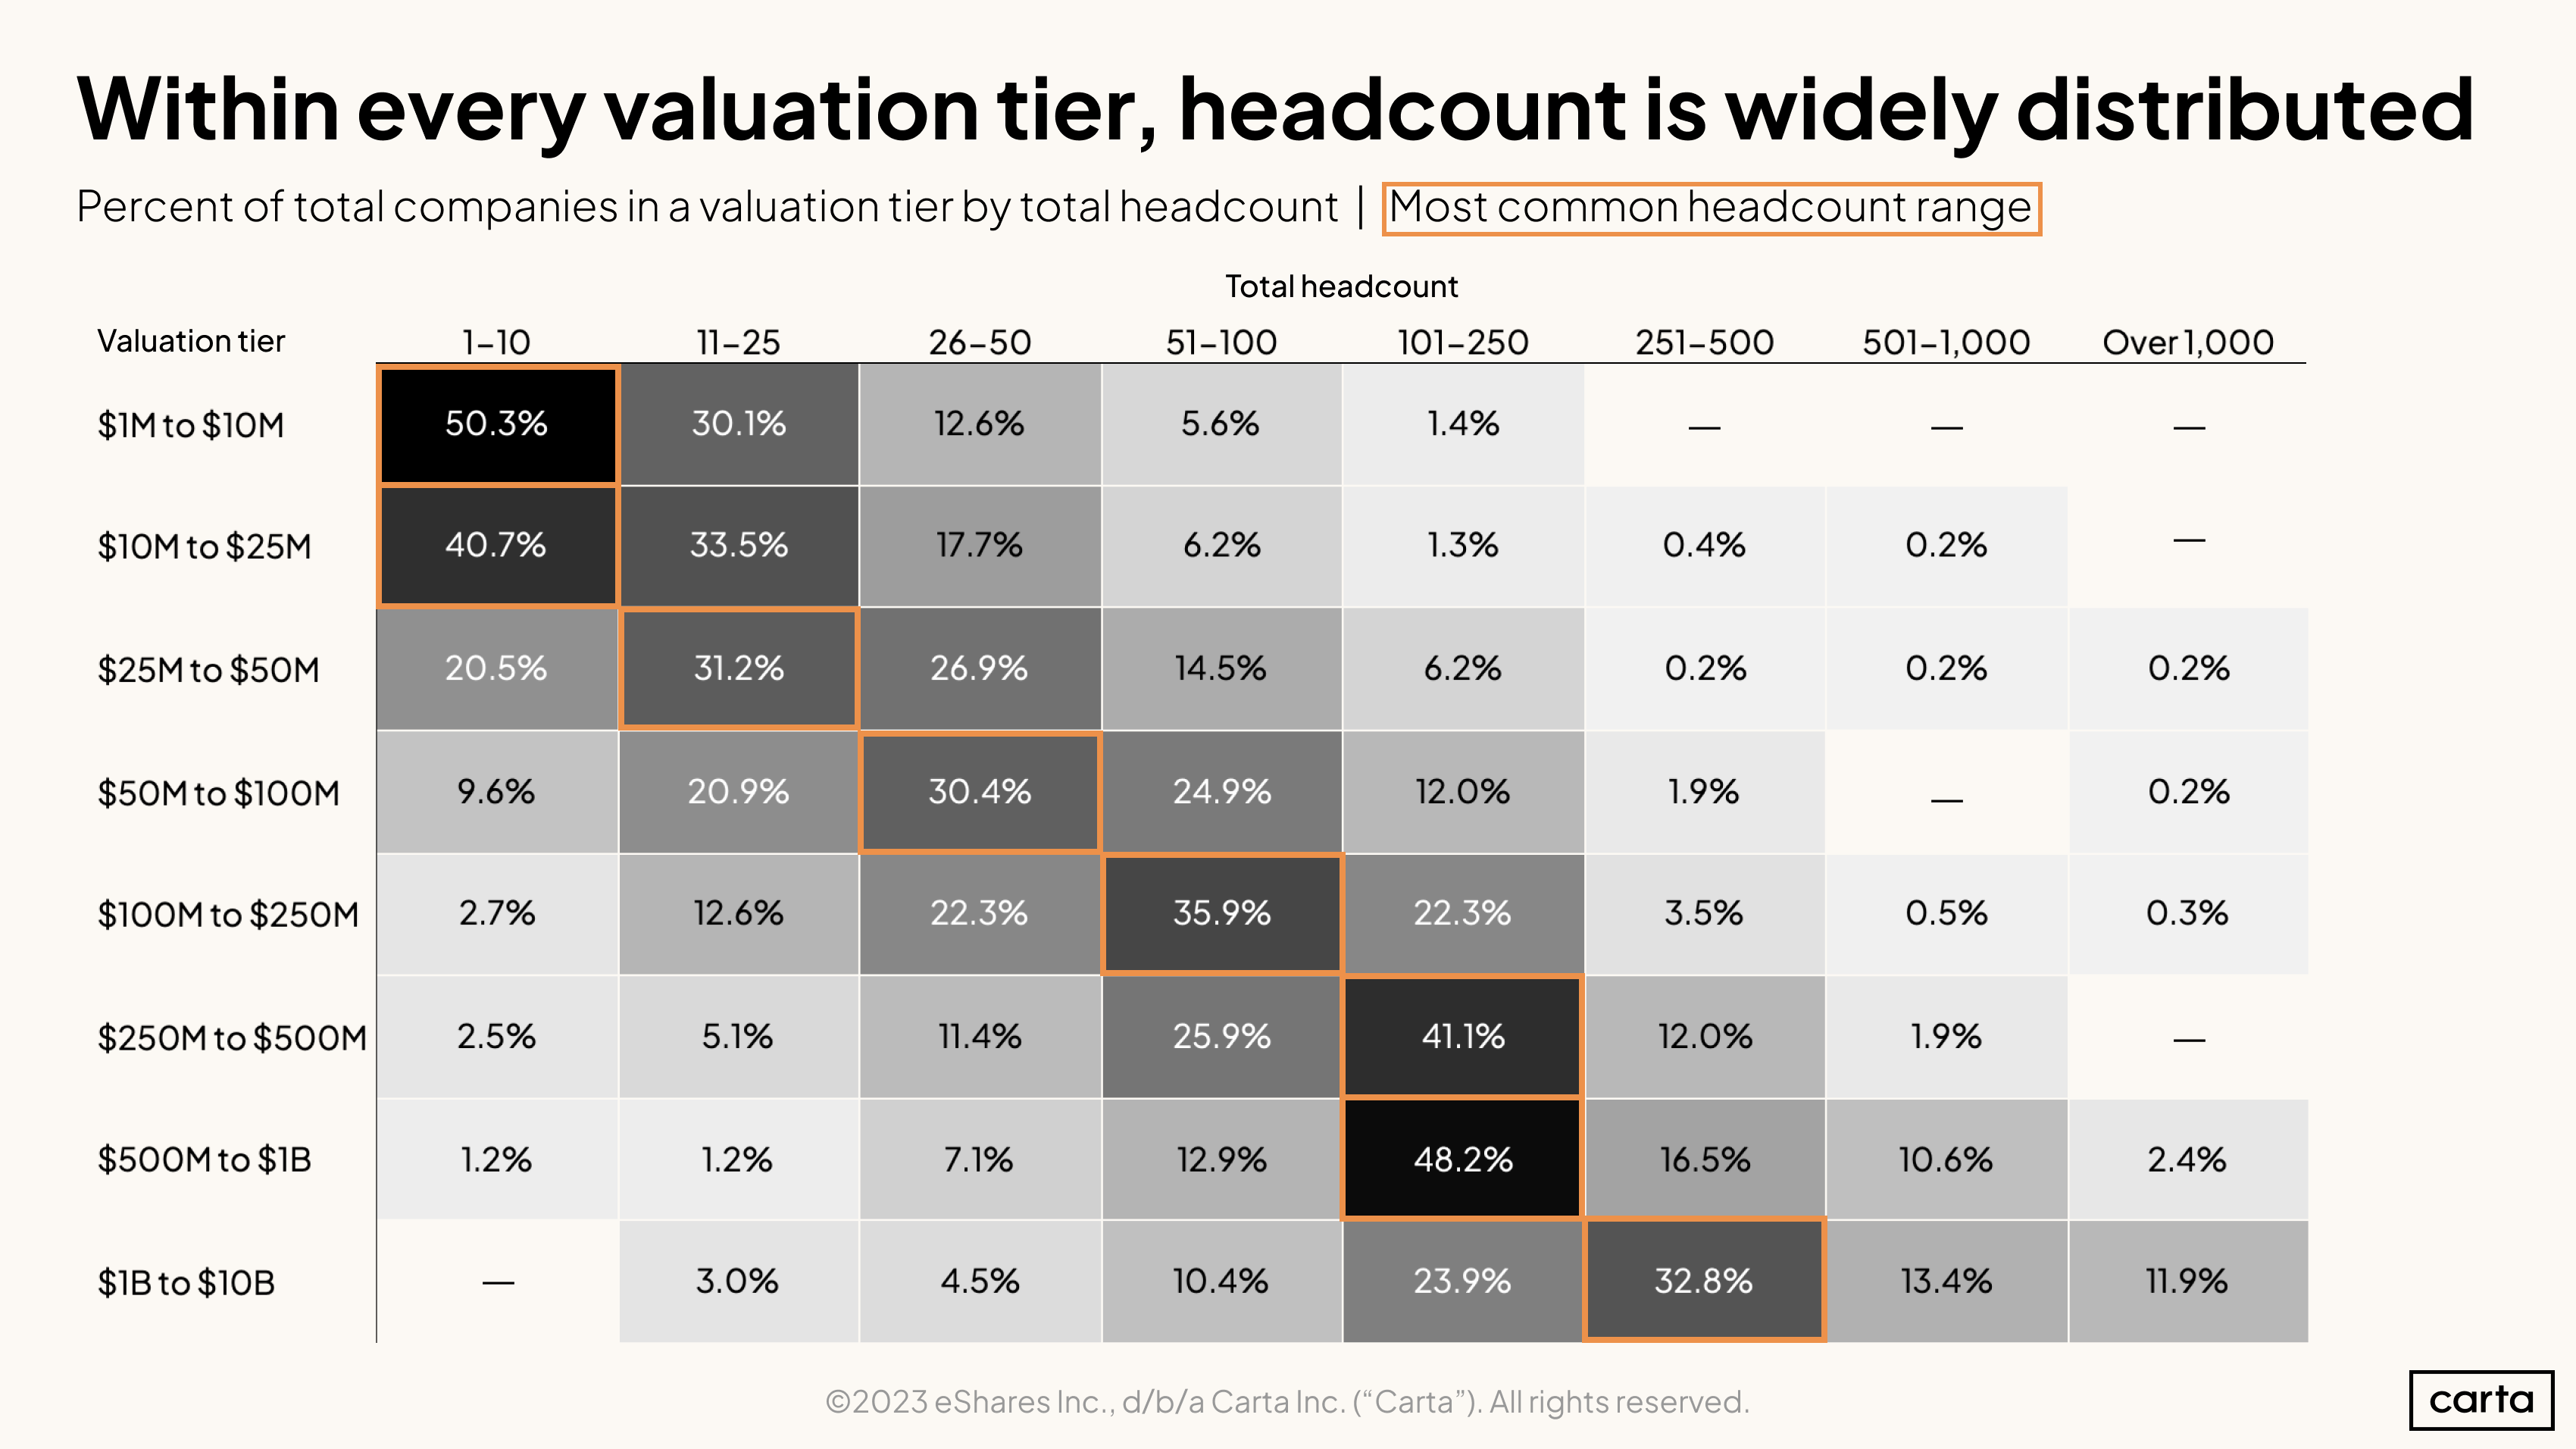 Percent of total companies in a valuation tier by total headcount